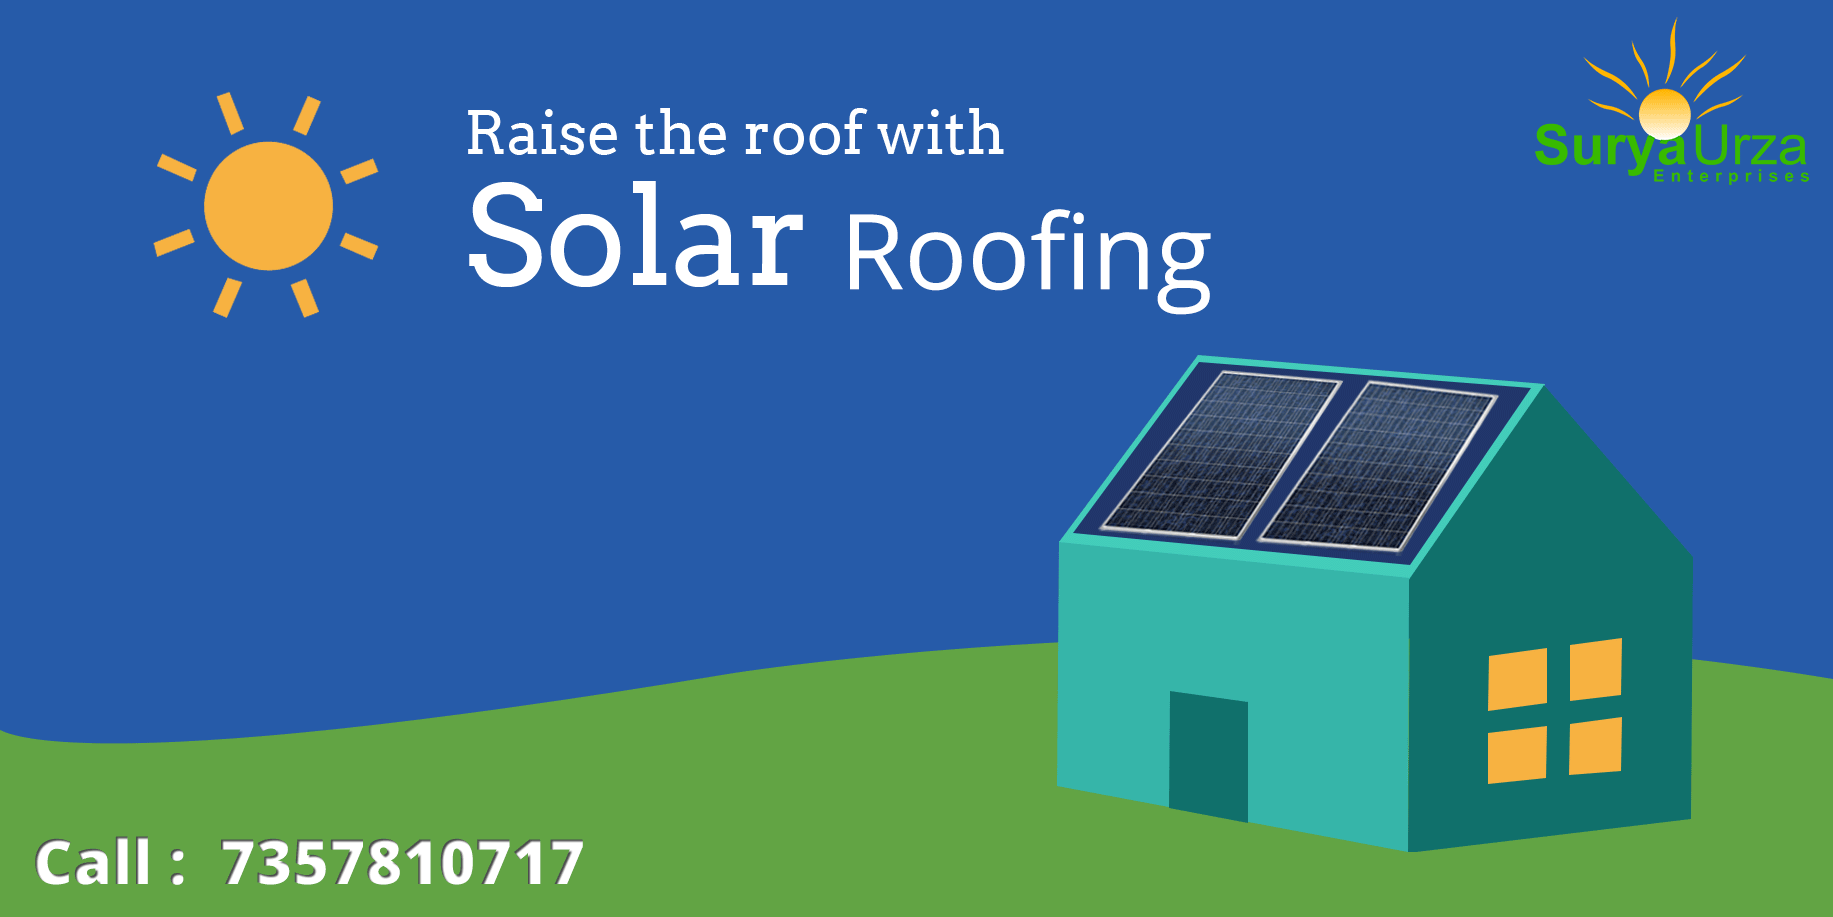 Solar-Roofing-Home - suryaurza - rooftop systems are primarily designed